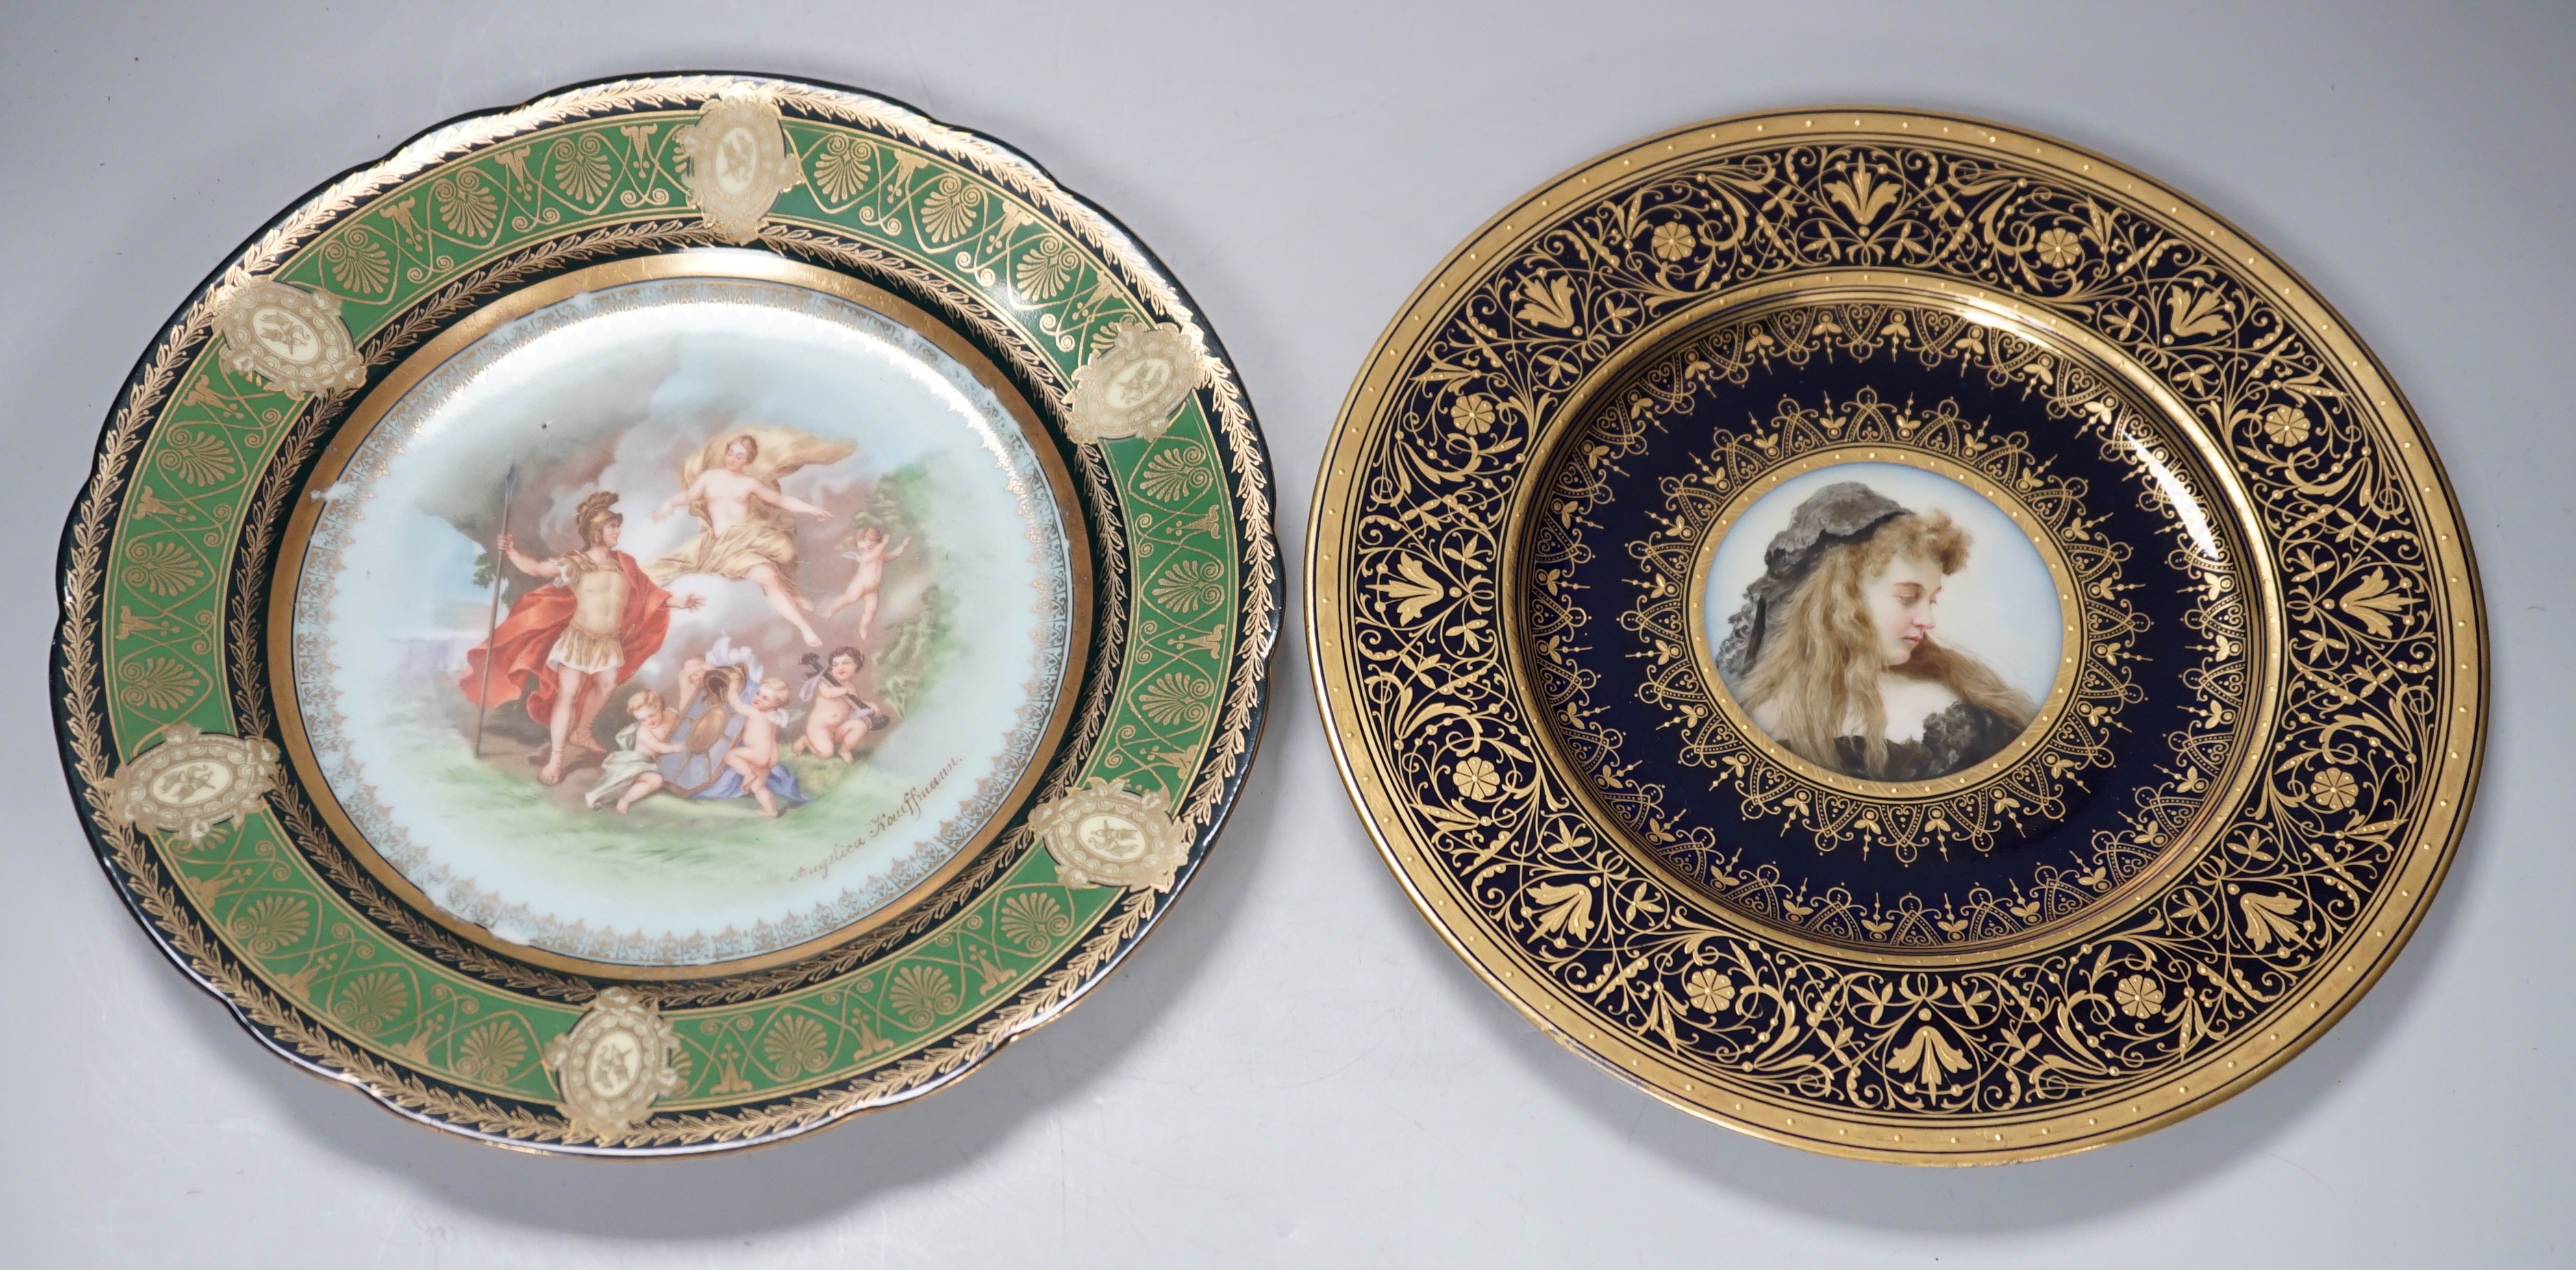 A Vienna style painted portrait plate, and another Vienna style plate both signed, largest 25cm diameter